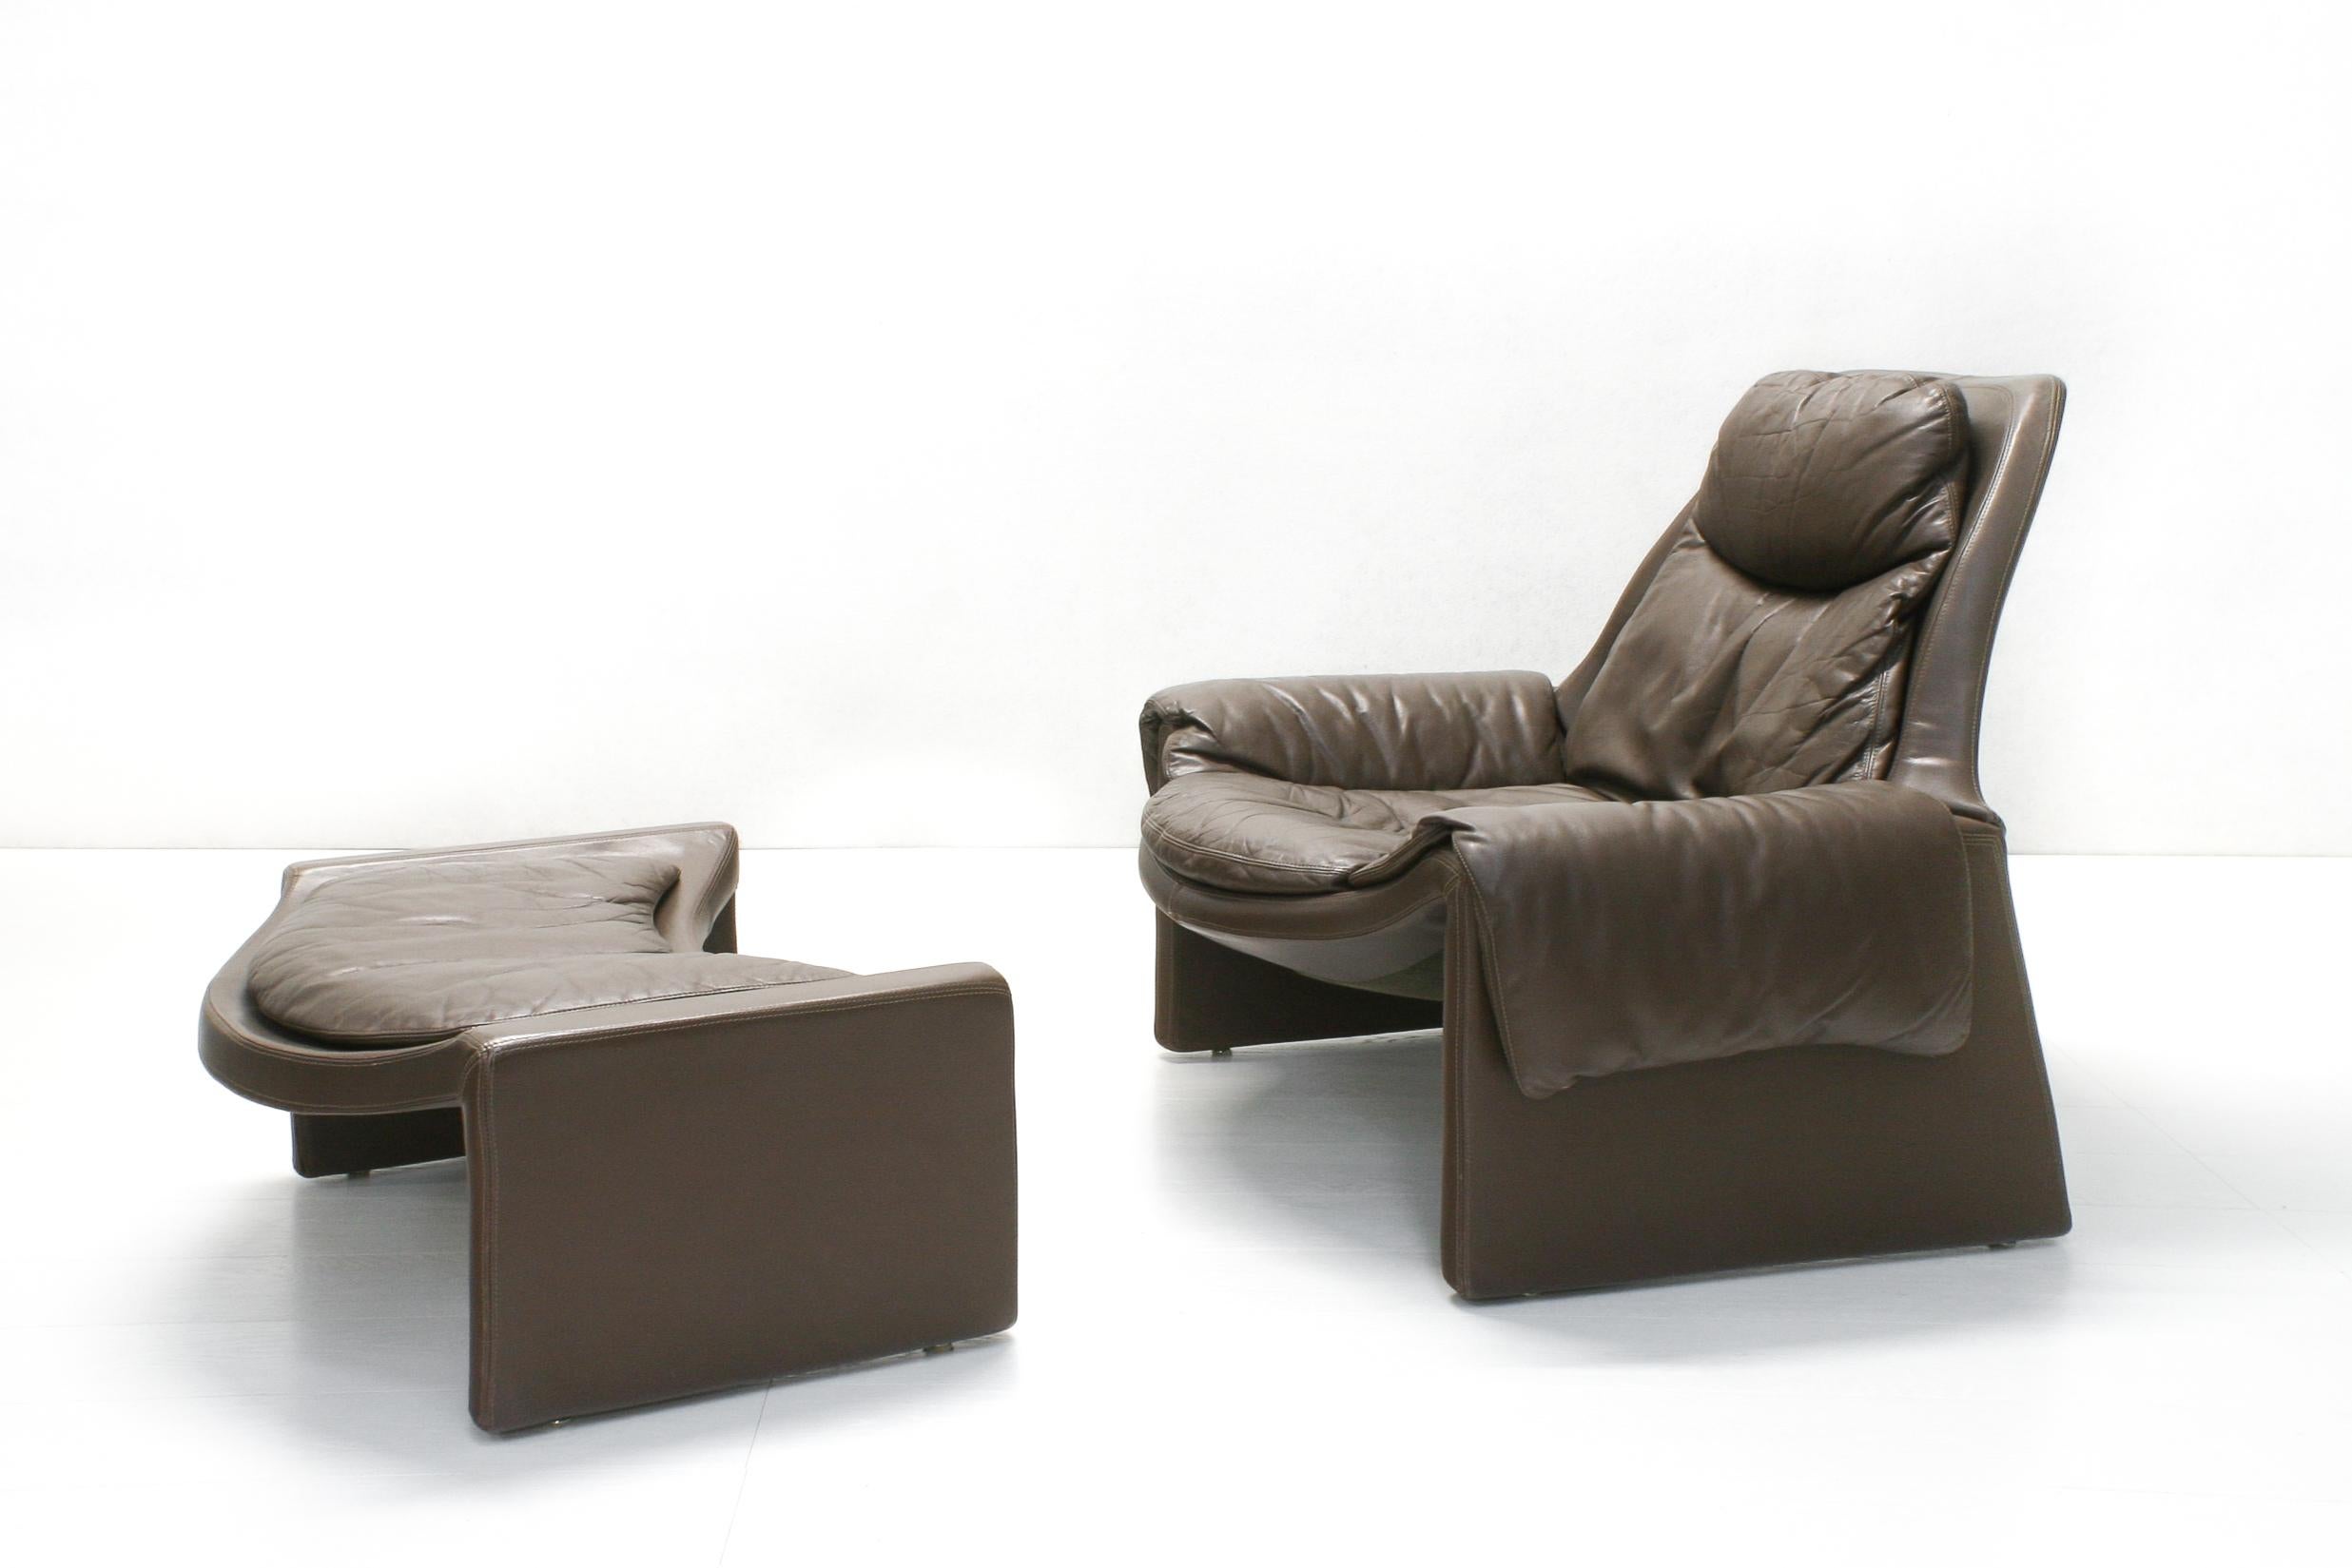 20th Century 1970s Proposals P60 Lounge Chair & P61 Ottoman by Vittorio Introini for Saporiti For Sale